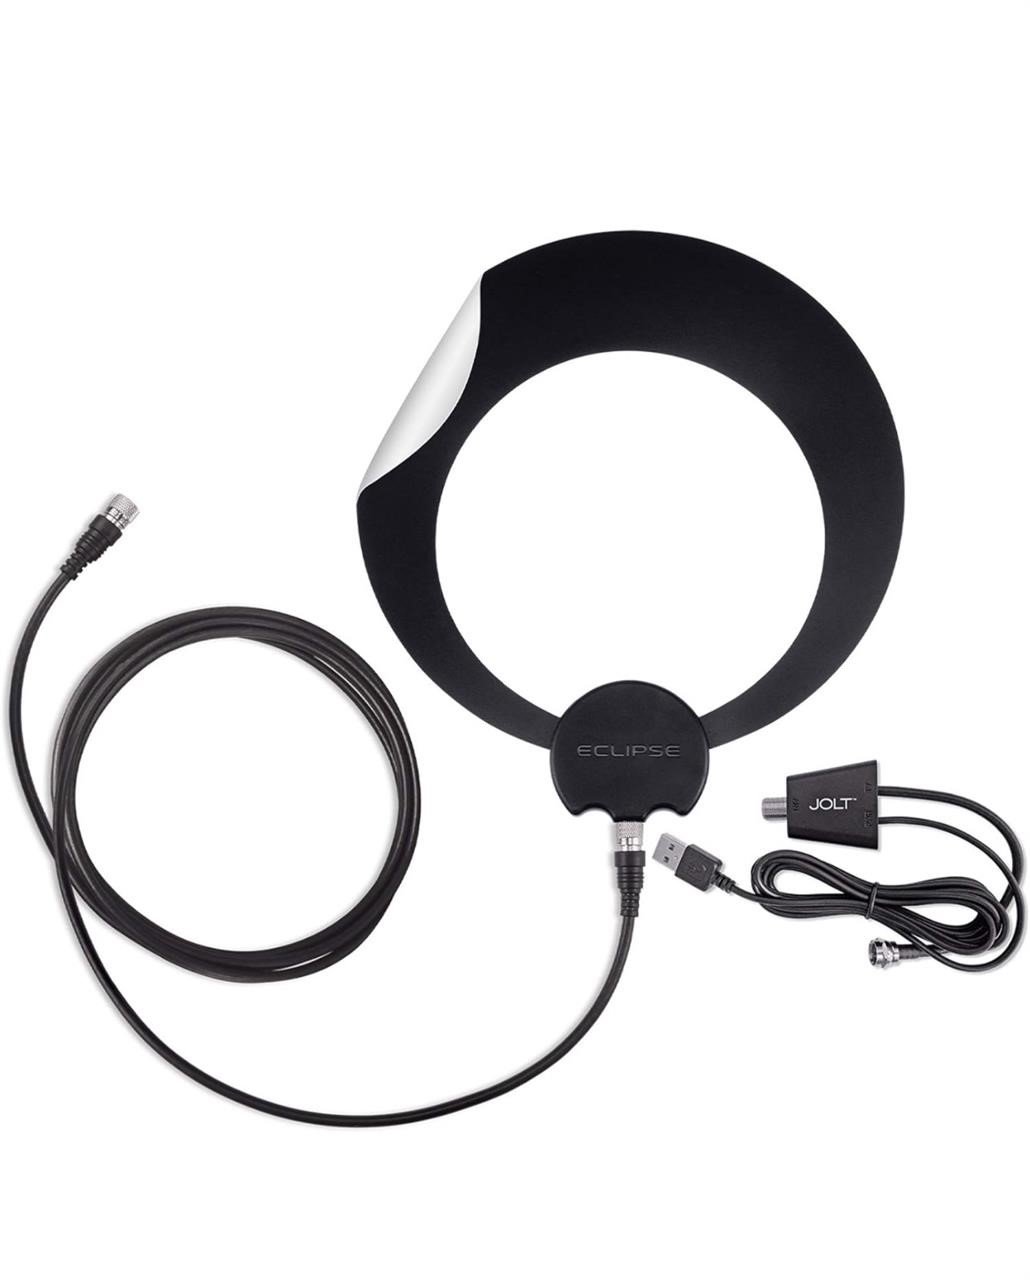 $30 Antennas Direct ClearStream Eclipse Amplified